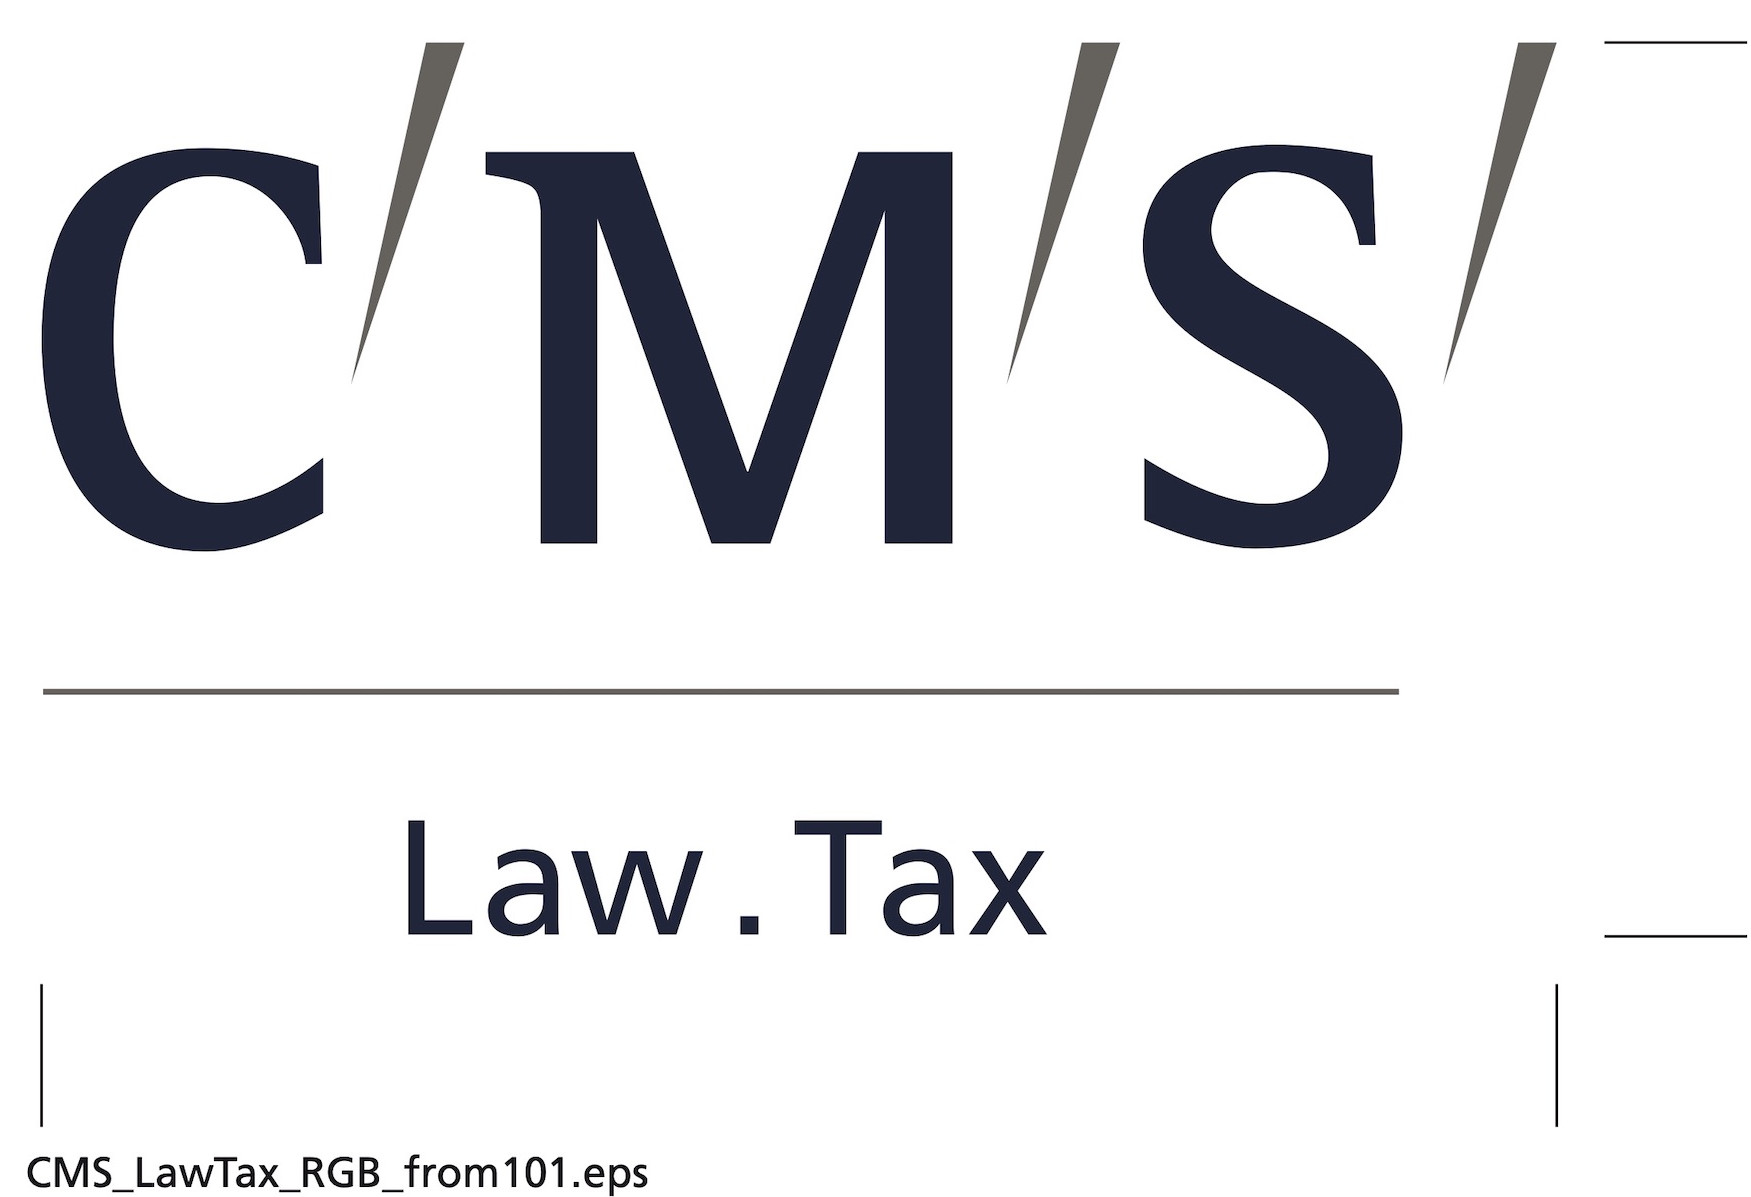 CMS Luxembourg | Paperjam Business Guide